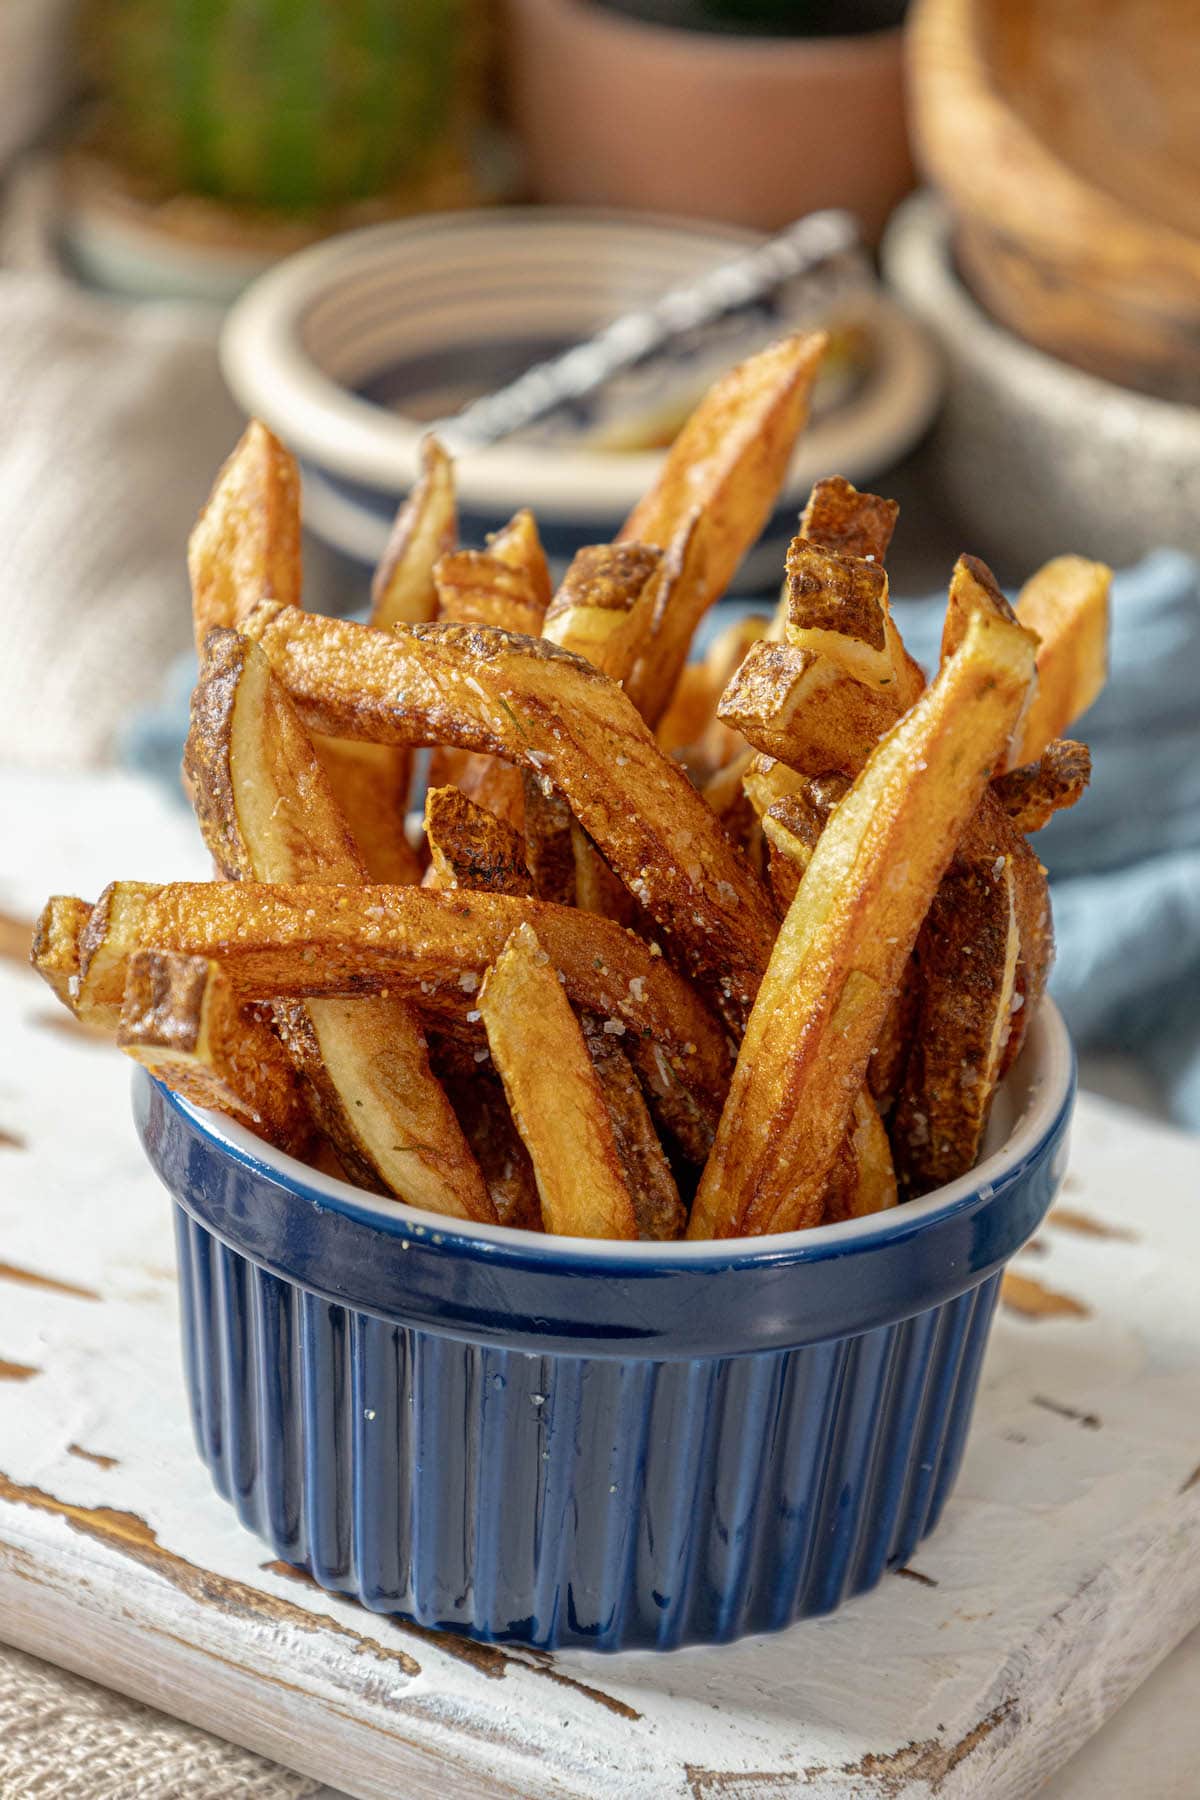 French fries in a blue bowl on a table.